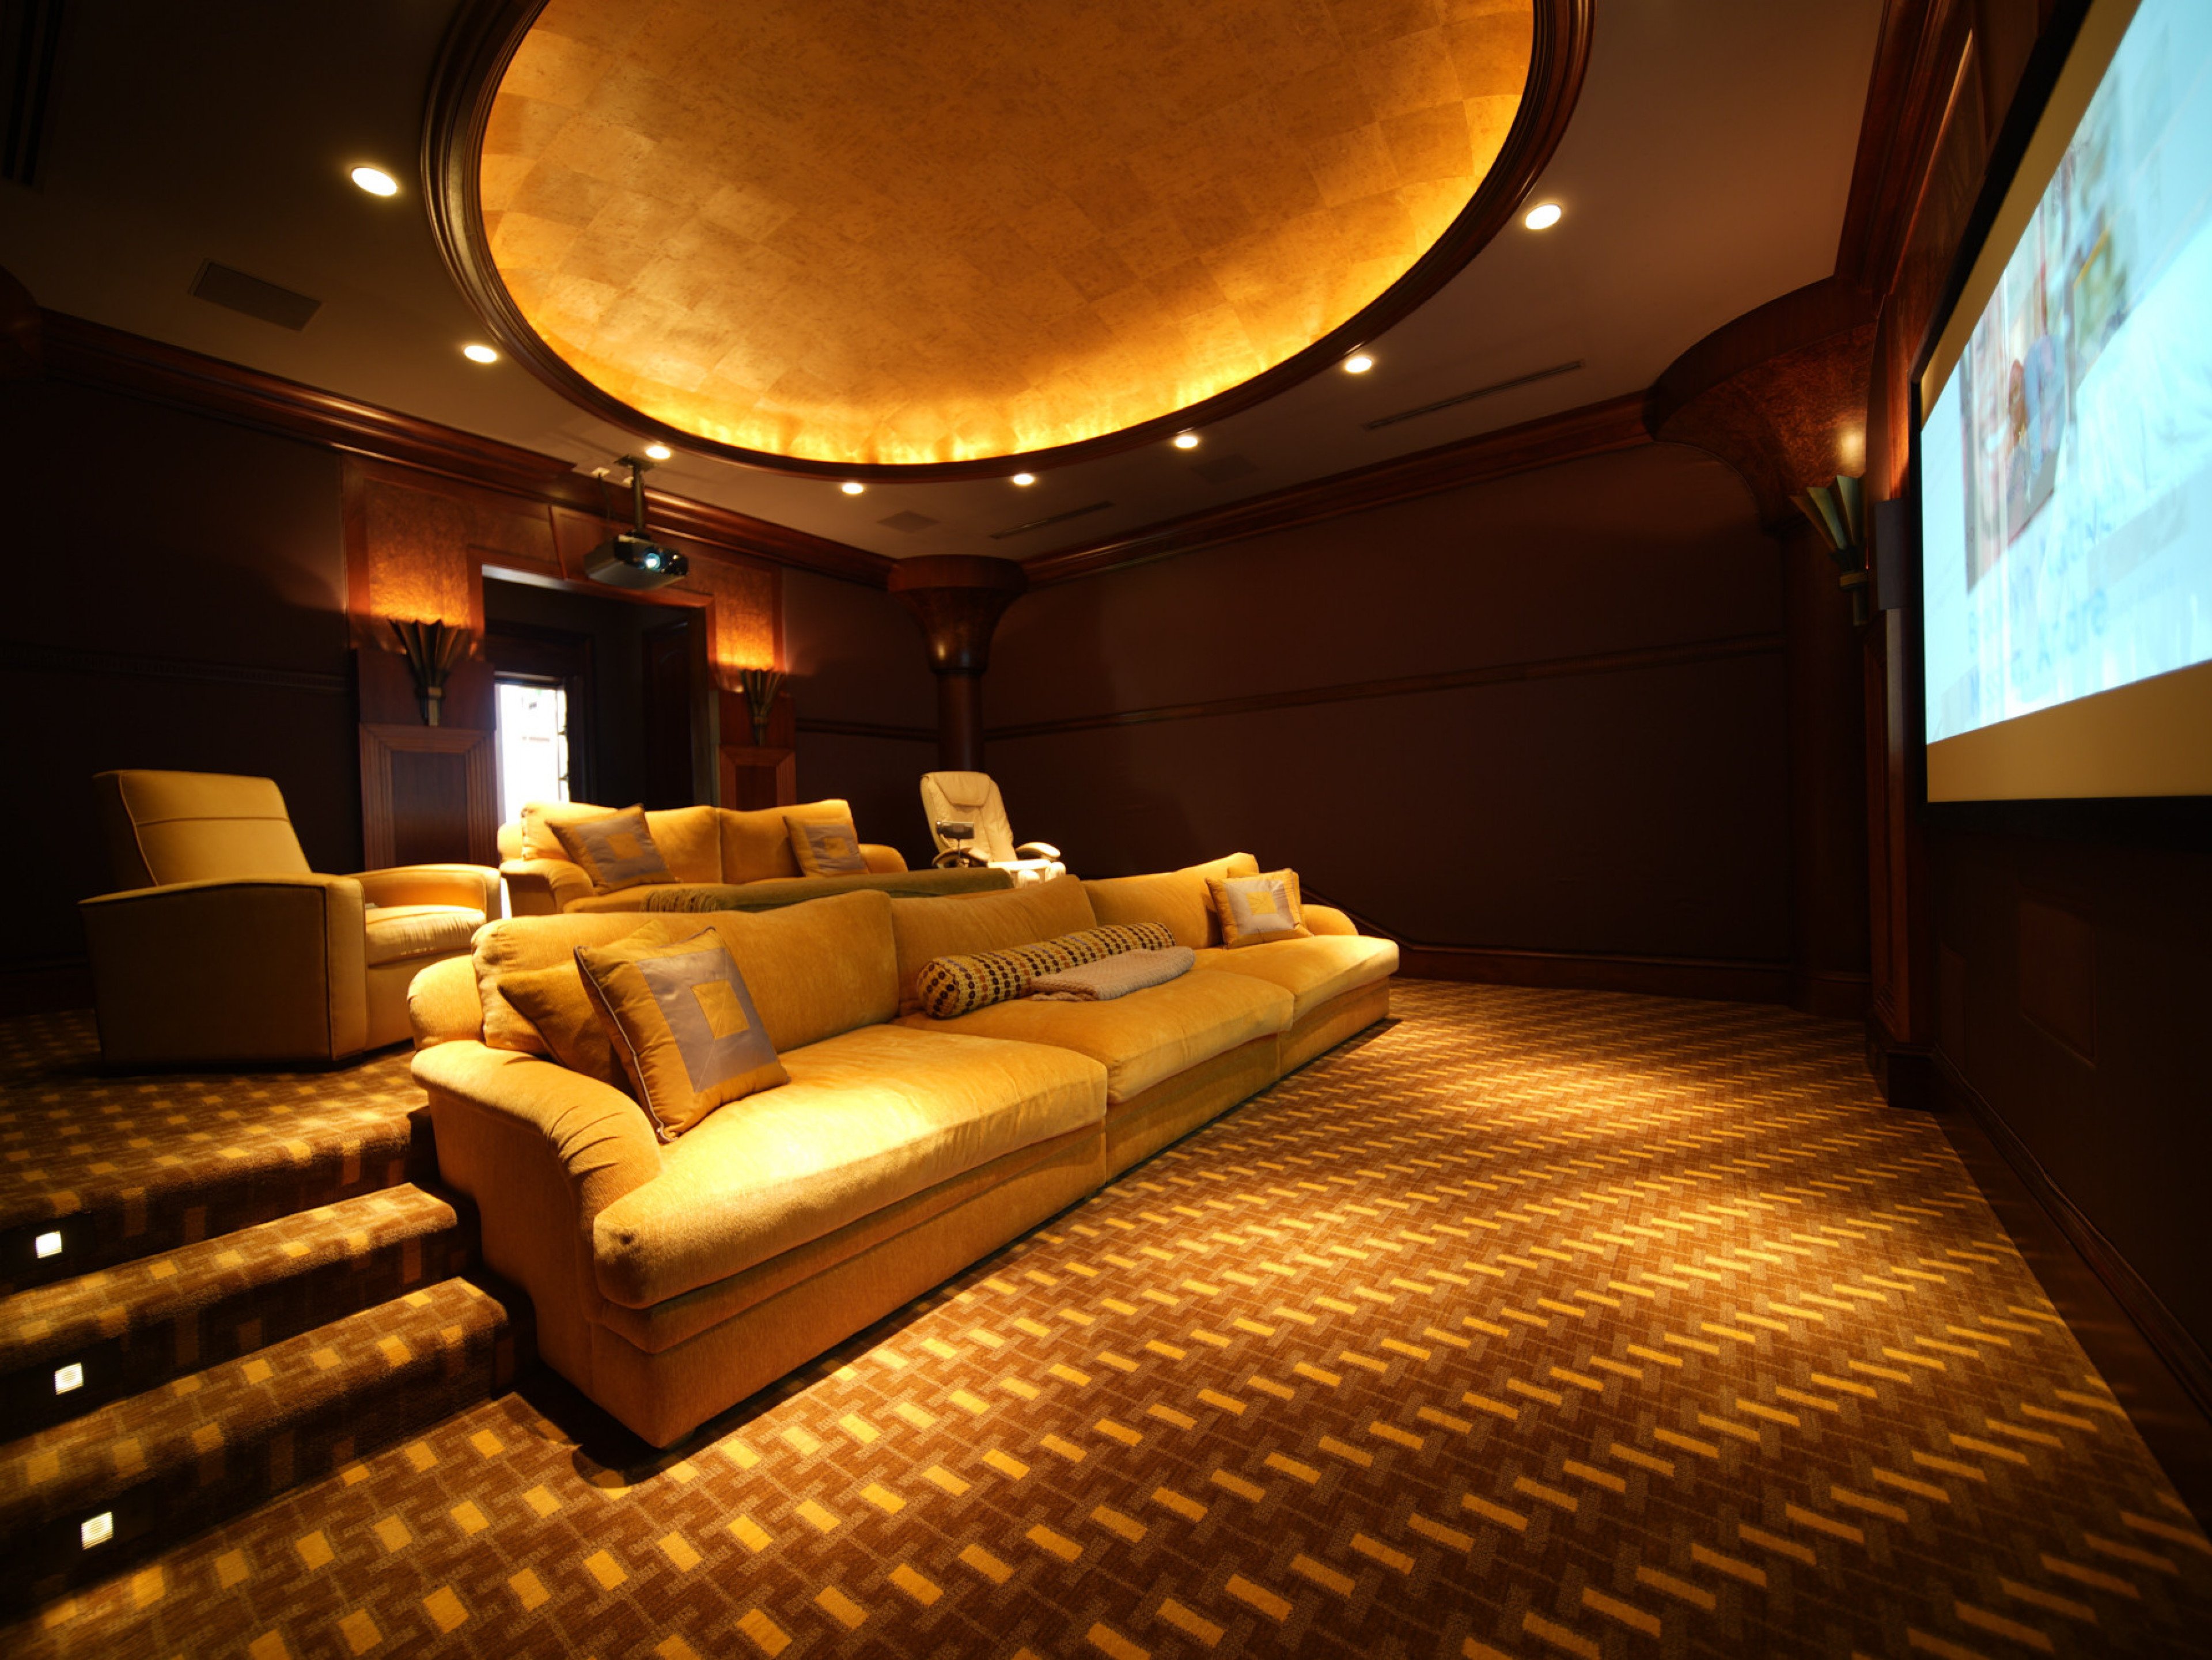 Kempa Caribe - vacation rentals with home theaters